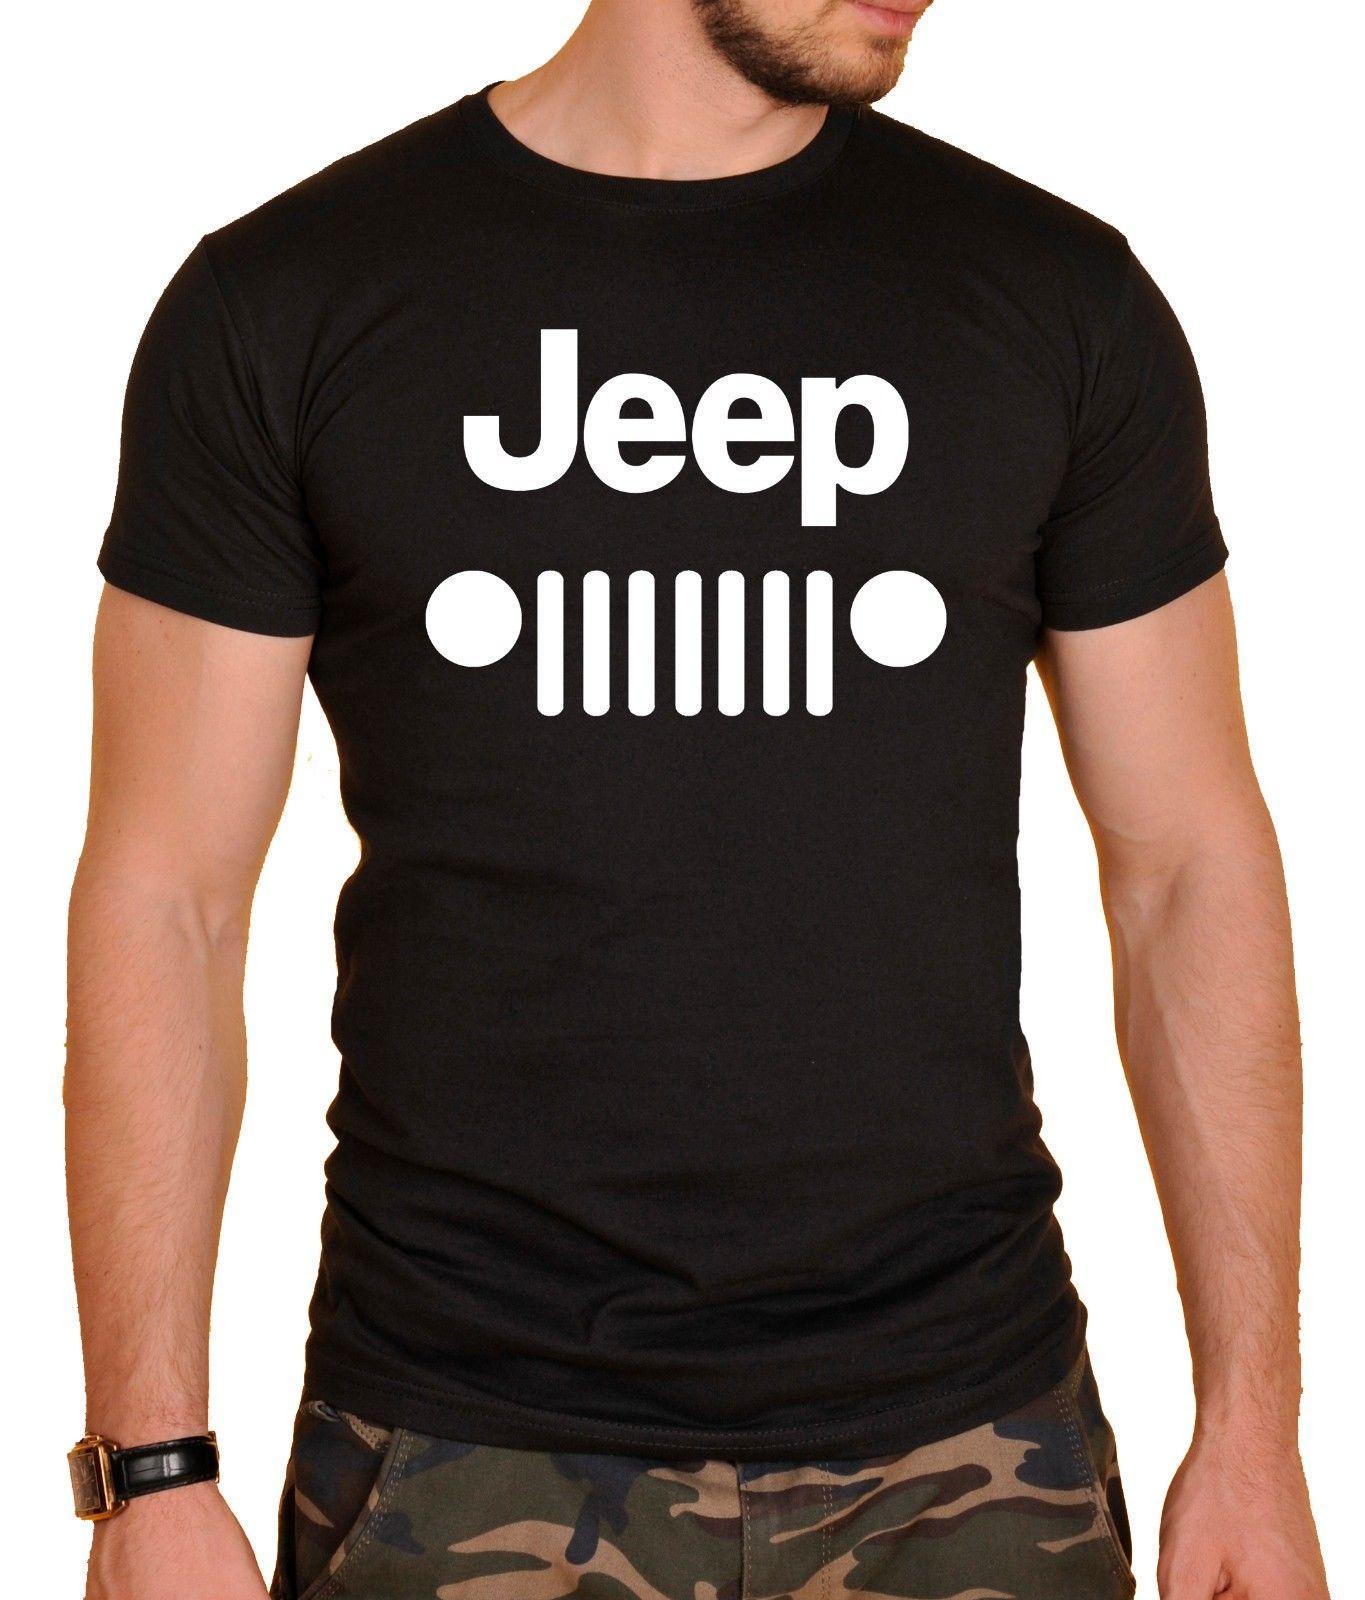 Funny Jeep Logo - Jeep Logo Cars T Shirt Black New Humor Tees Funny Tee From Jie035